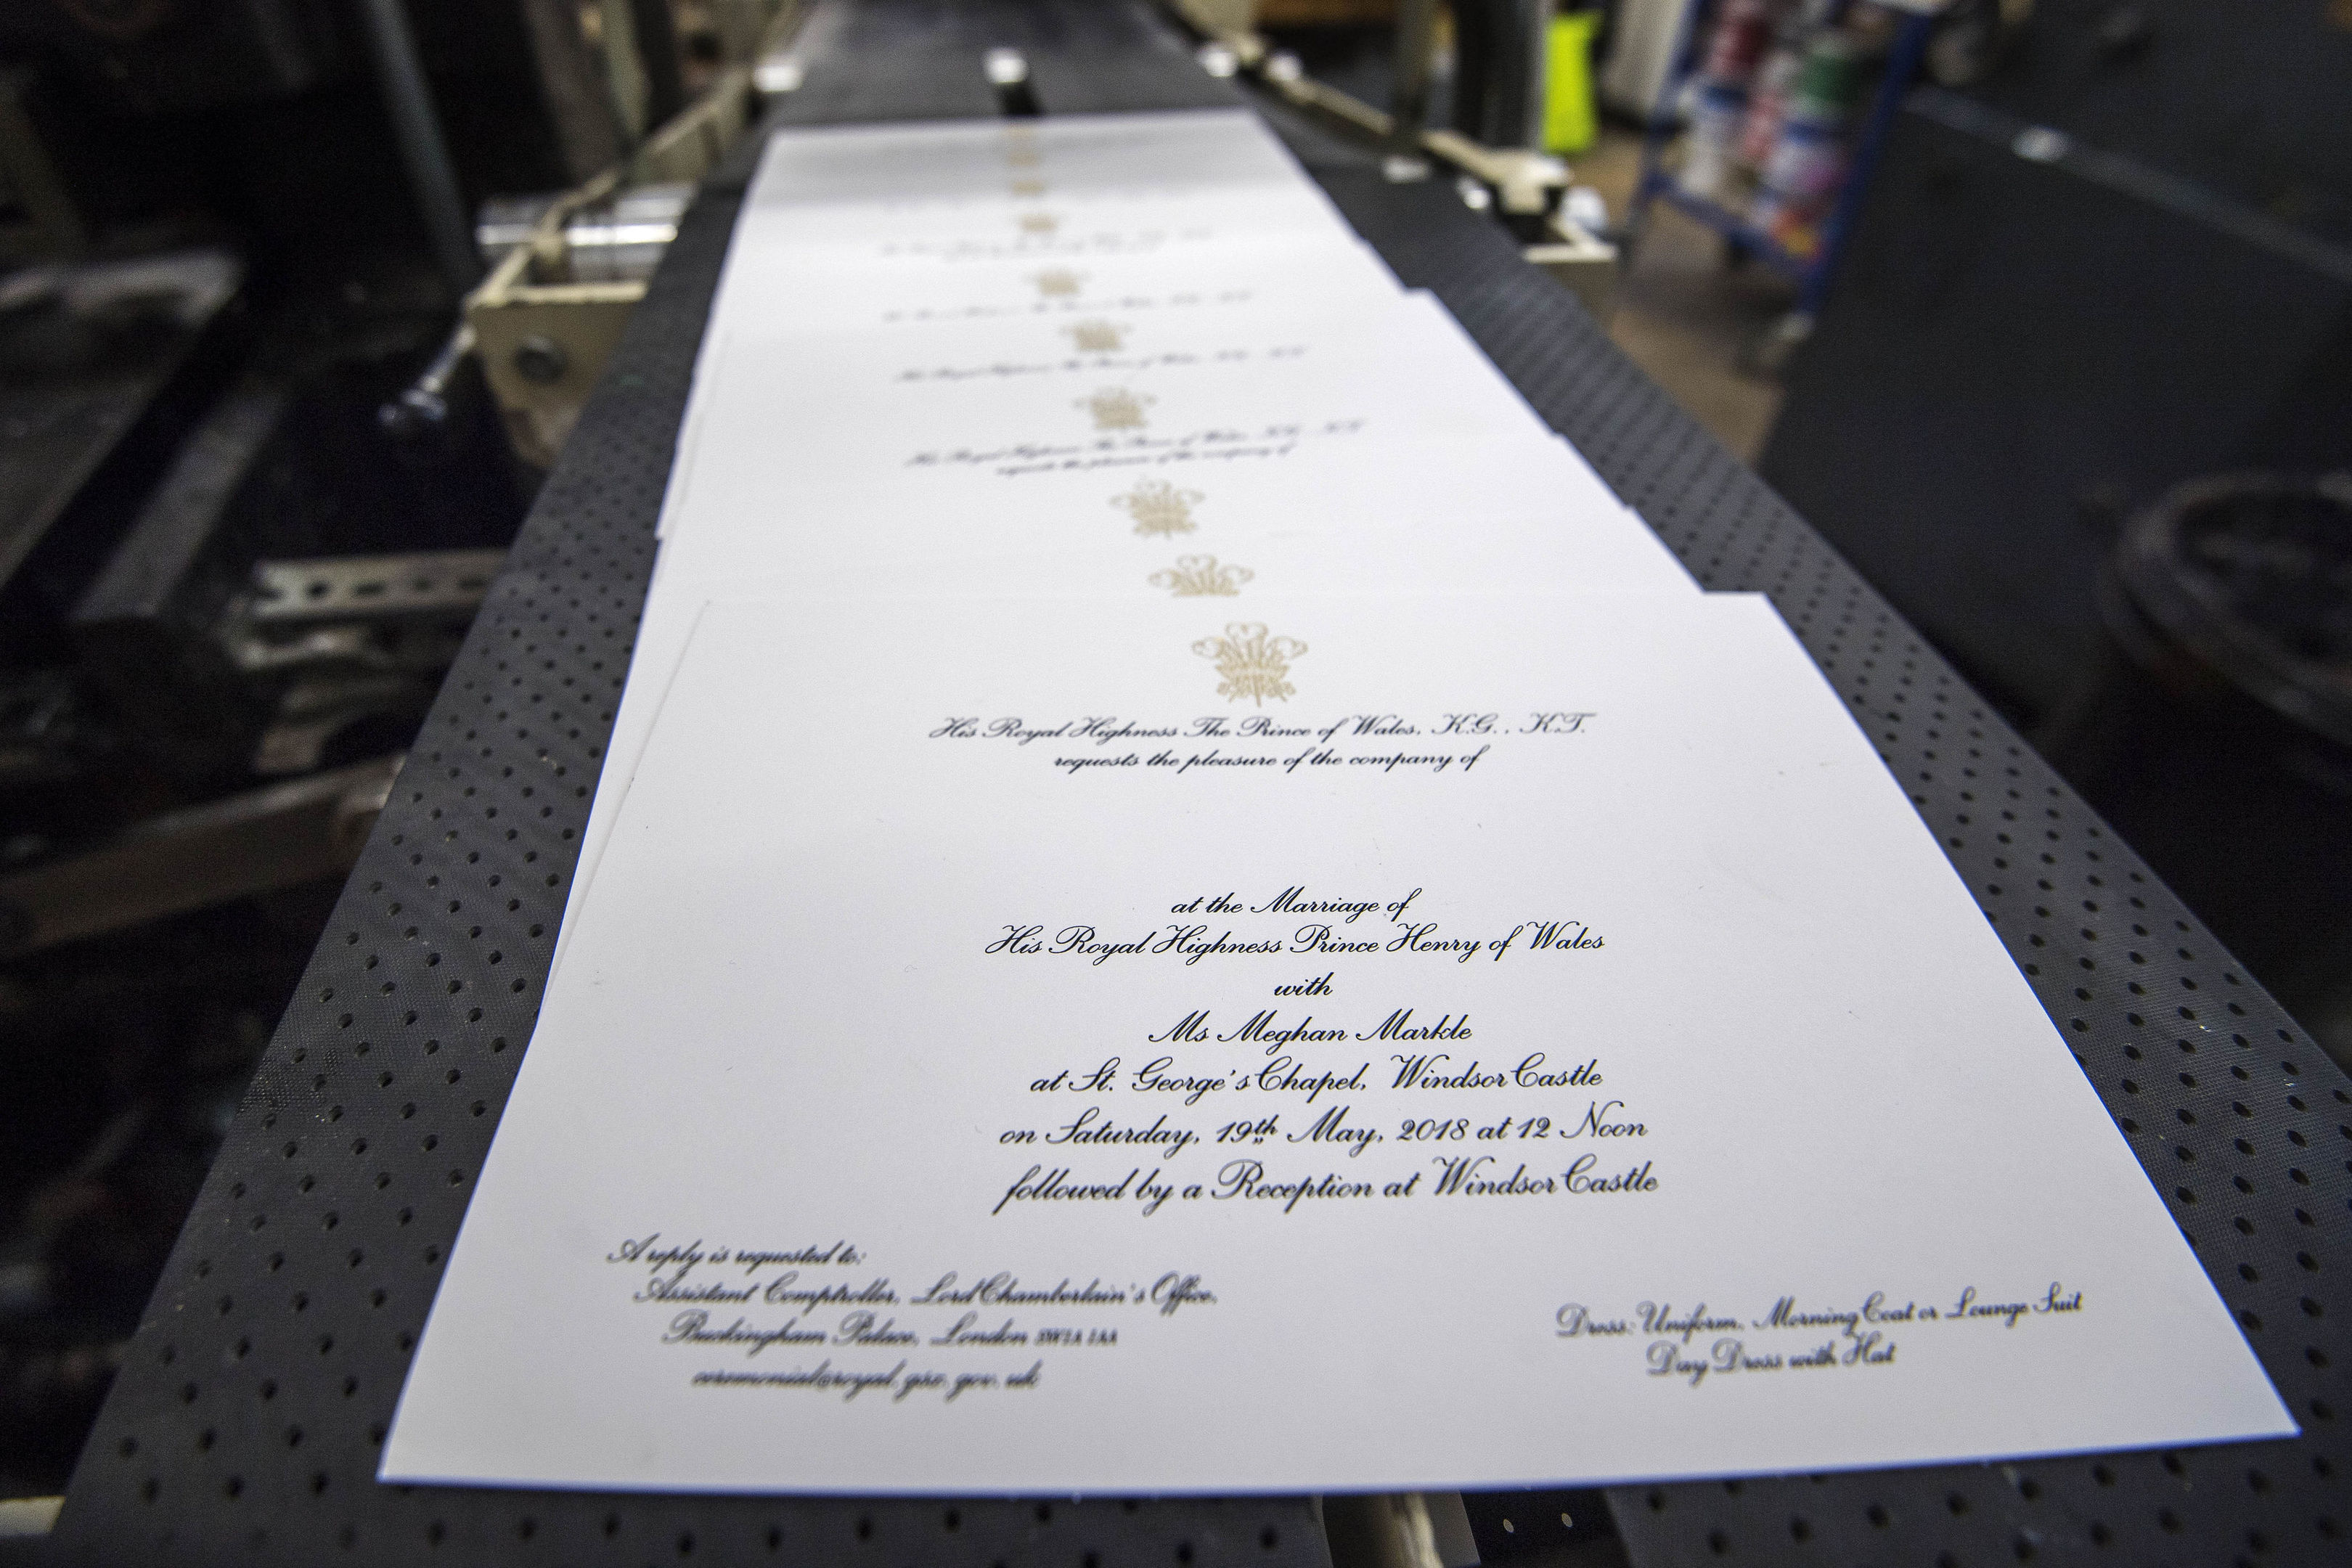 Invitations for Prince Harry and Meghan Markle's wedding in May (Victoria Jones/PA Wire)